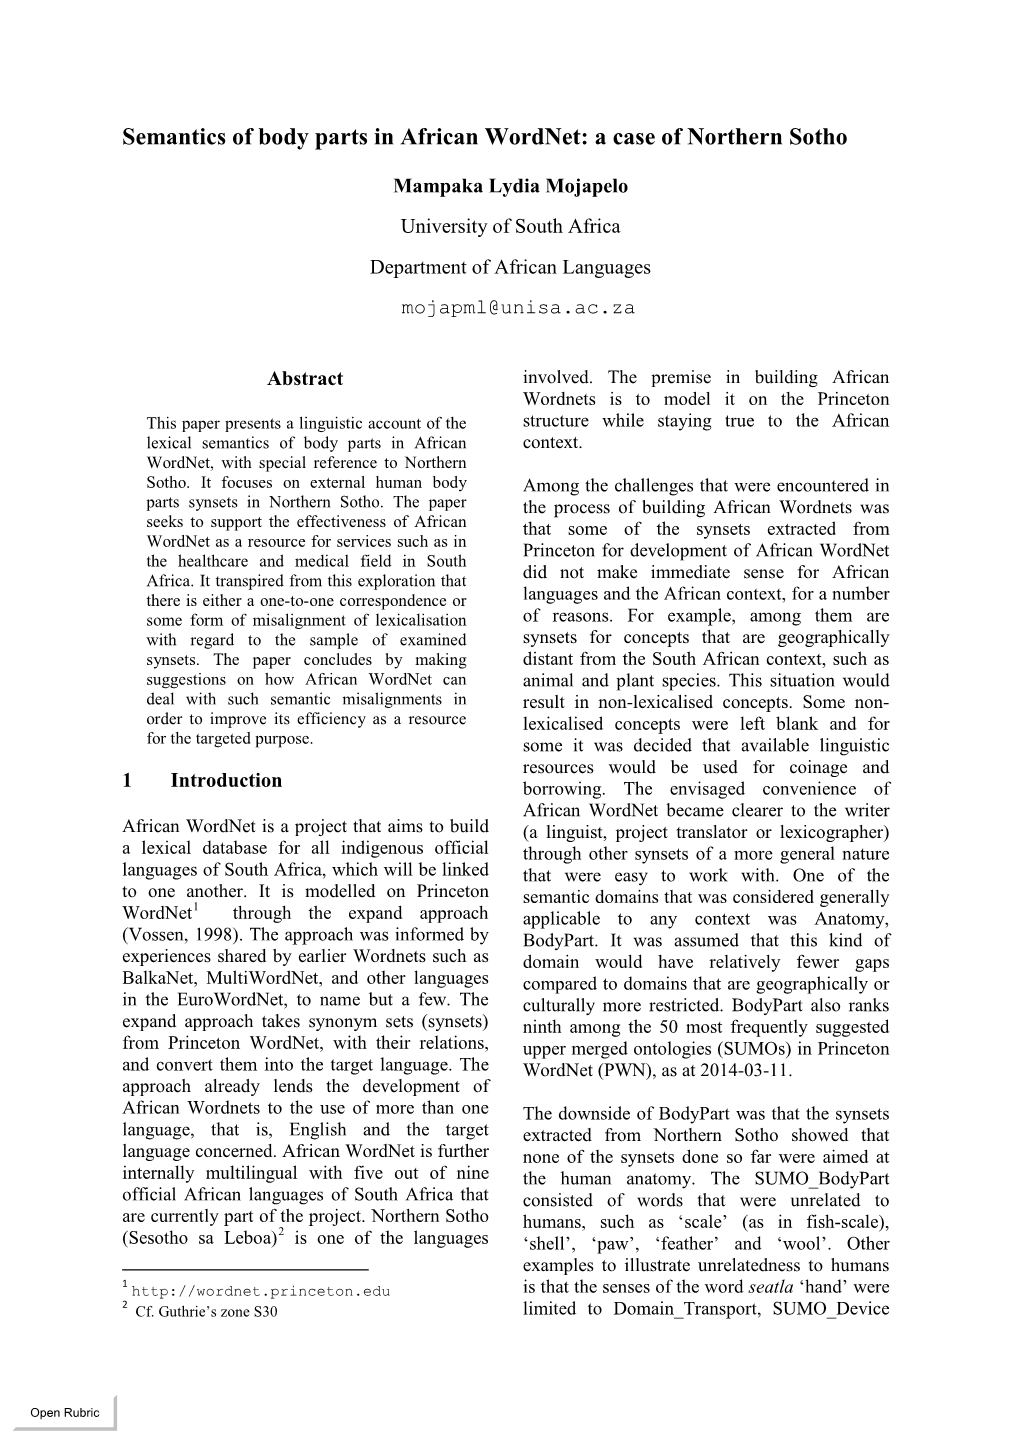 Semantics of Body Parts in African Wordnet: a Case of Northern Sotho